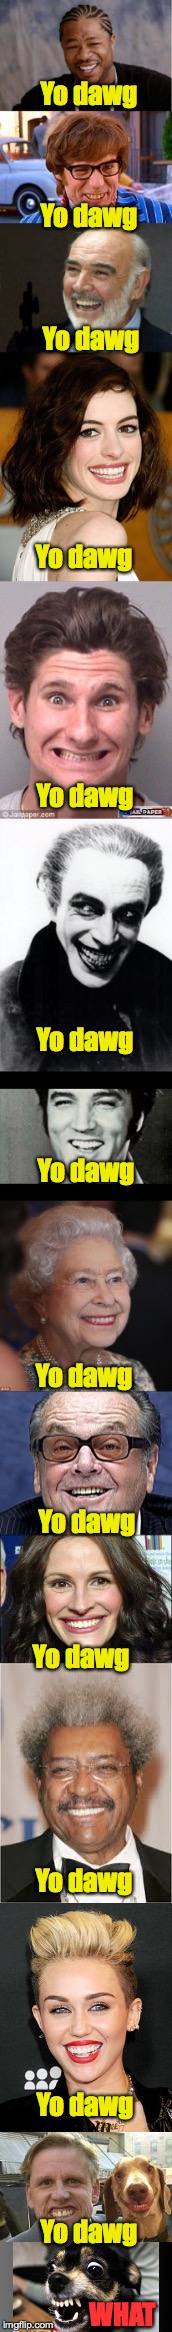 More Meme Wars? | Yo dawg; Yo dawg; Yo dawg; Yo dawg; Yo dawg; Yo dawg; Yo dawg; Yo dawg; Yo dawg; Yo dawg; Yo dawg; Yo dawg; Yo dawg; WHAT | image tagged in yo dawg,many grins | made w/ Imgflip meme maker